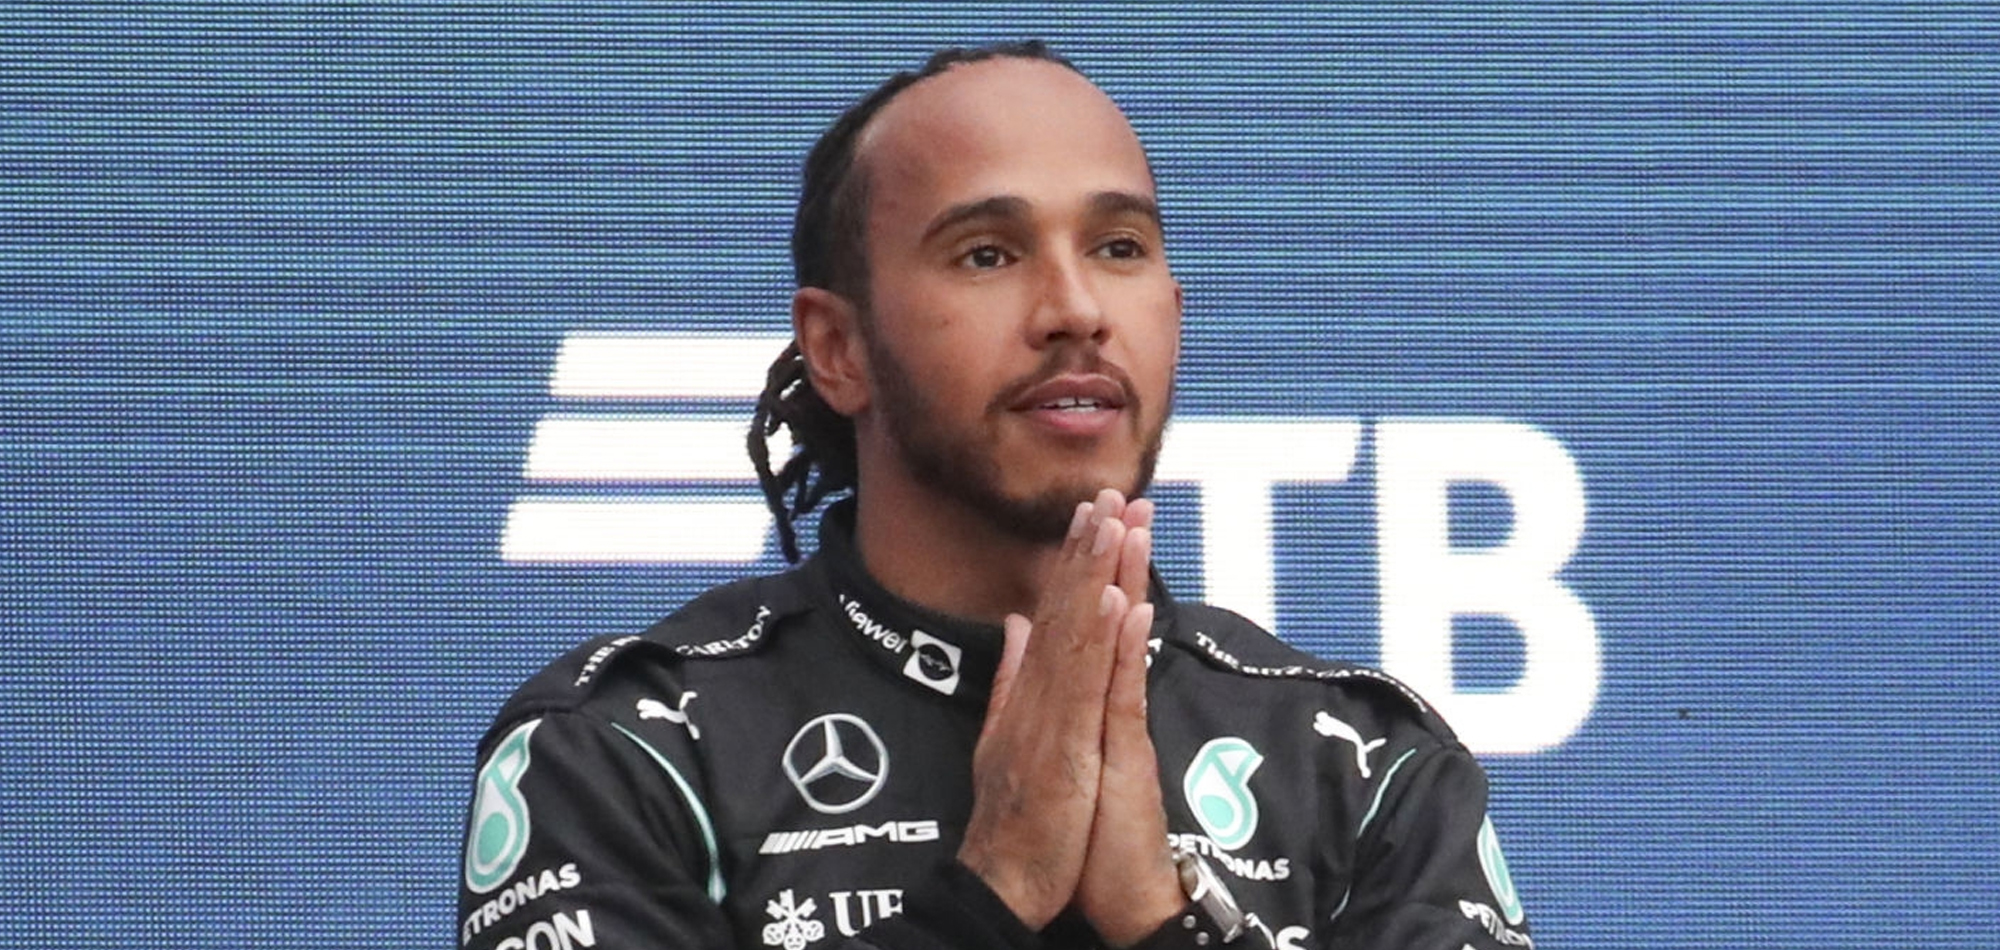 Hamilton wins 100th F1 race to take lead over Verstappen